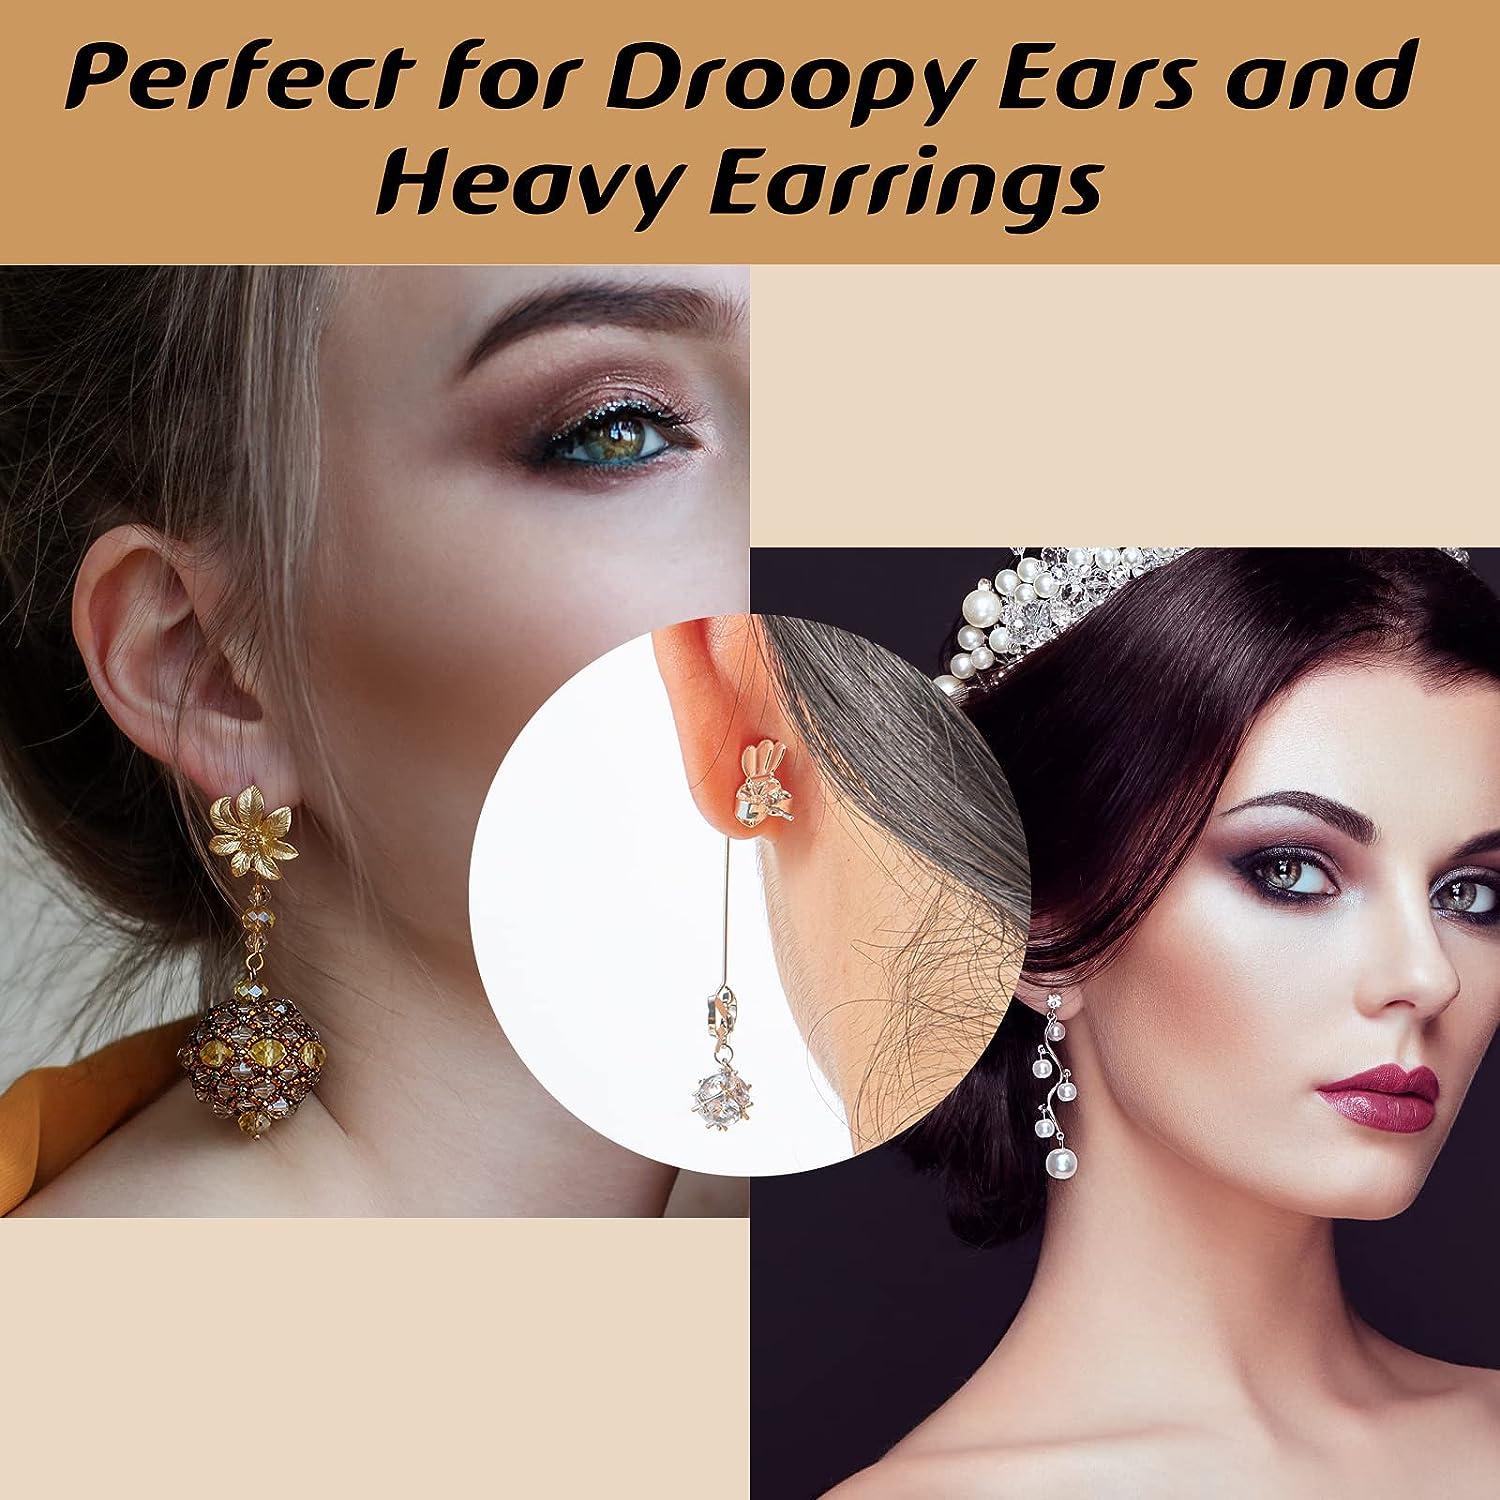 10 Pcs/5 Pairs Earring Backs for Studs, Droopy Ears and Heavy Earring,  Upgraded Heavy Earring Support Backs, Tiara Earring Backs to Prevent  Drooping, Hypoallergenic Earring Lifters (Silver + Gold)